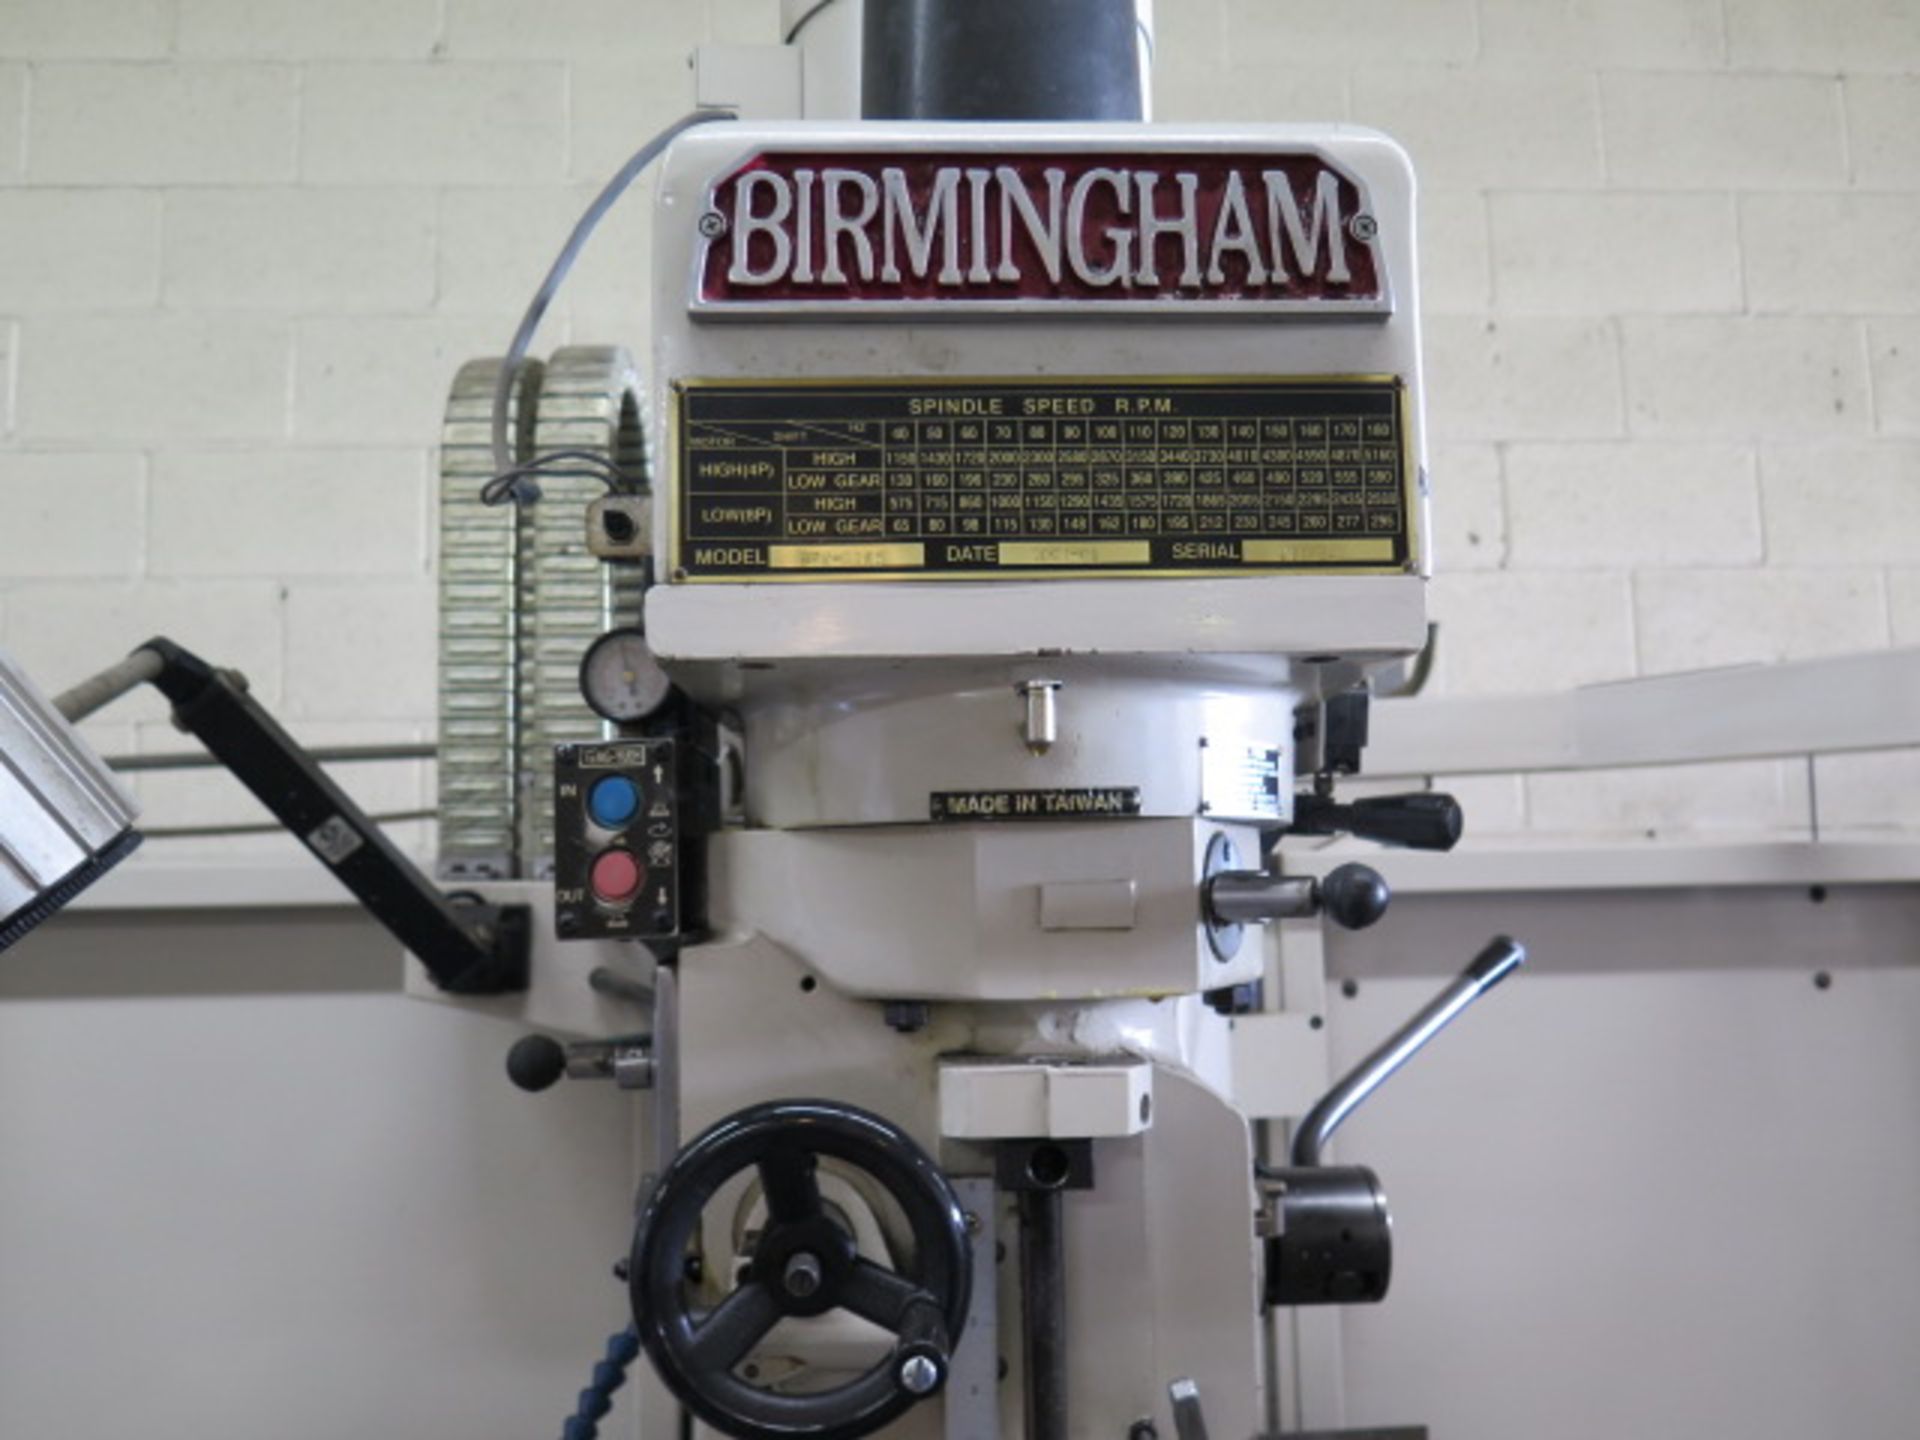 Birmingham BRV-B3VS 2-Axis CNC Mill s/n 011454 w/ Centroid Controls, 40-Taper Spindle, SOLD AS IS - Image 7 of 15